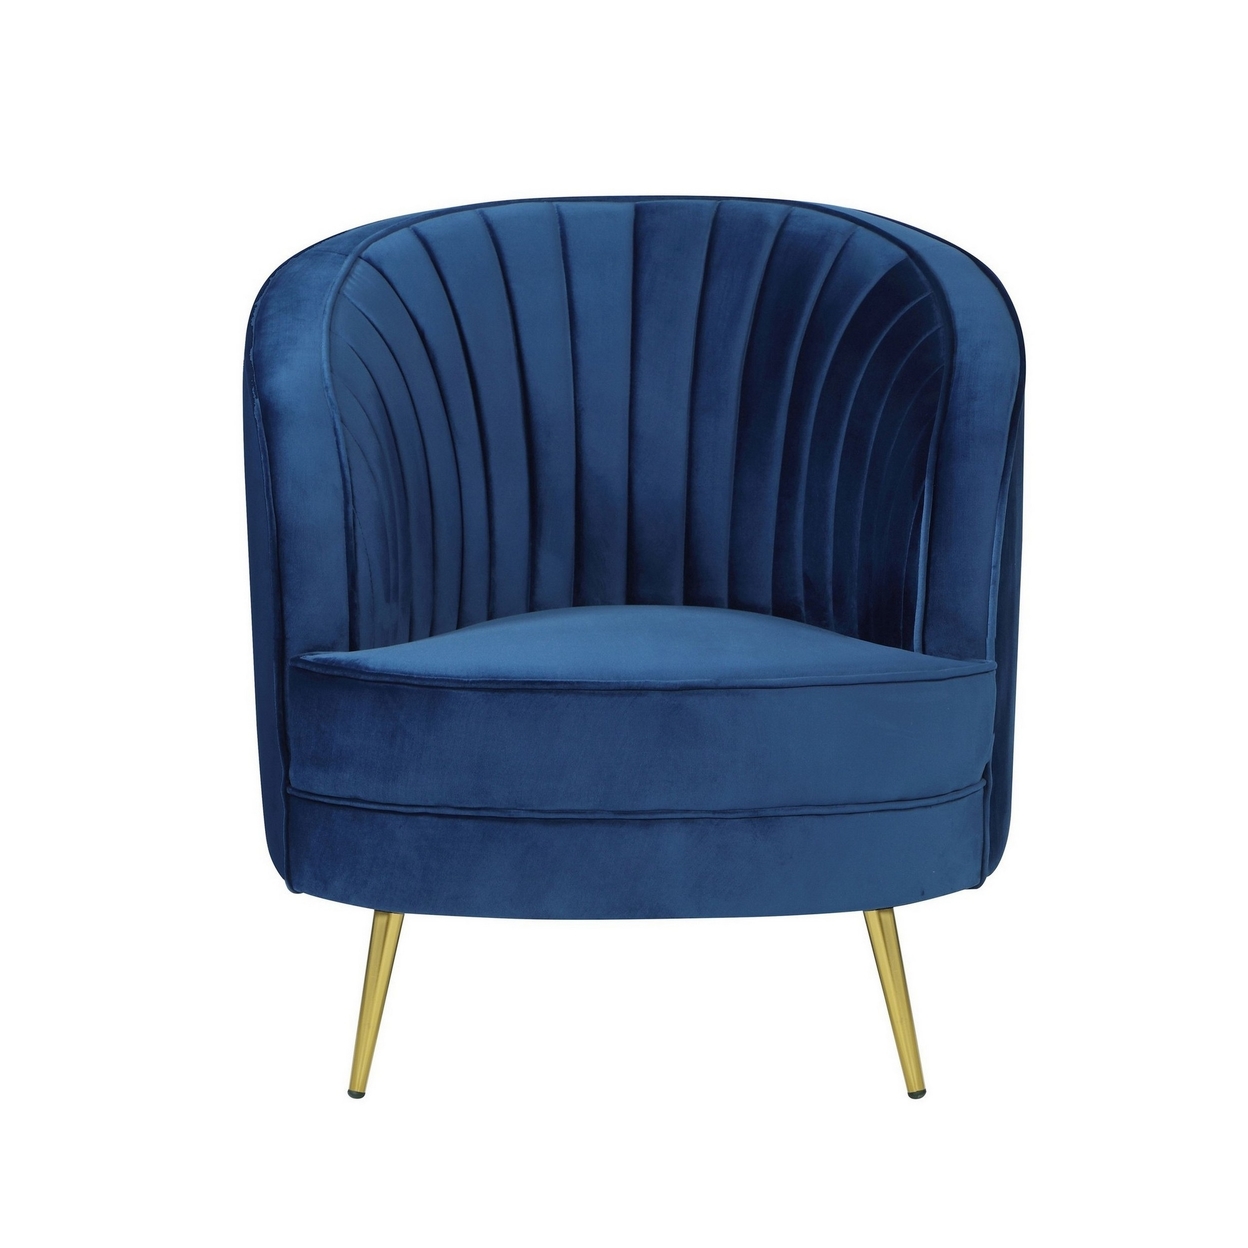 31 Inch Club Chair, Blue Velvet, Vertical Tufted Channels, Art Deco Style